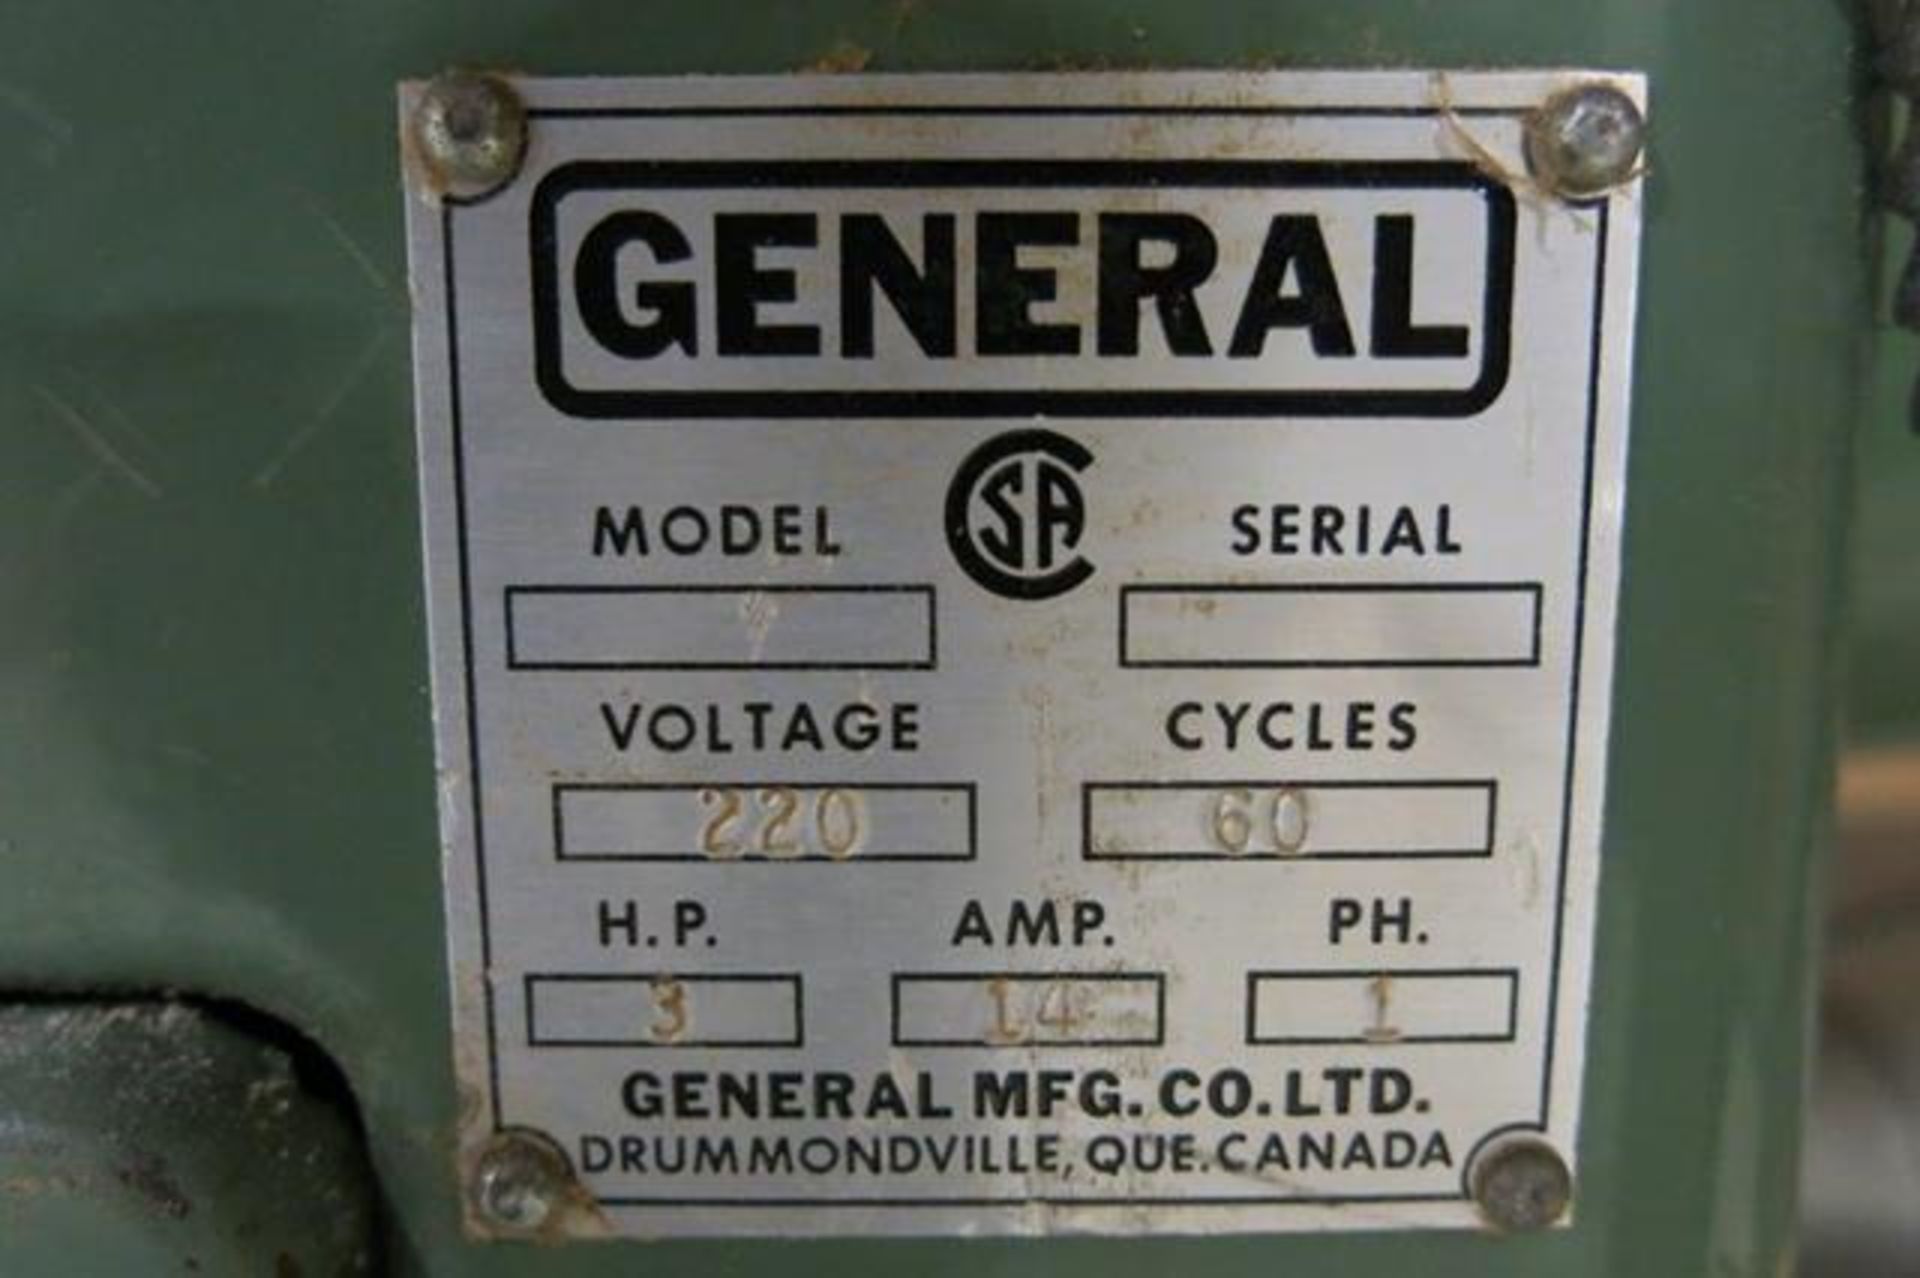 GENERAL, 350, TABLE SAW, S/N AD2714 WITH DUST COLLECTOR (RIGGING - $125) - Image 3 of 5